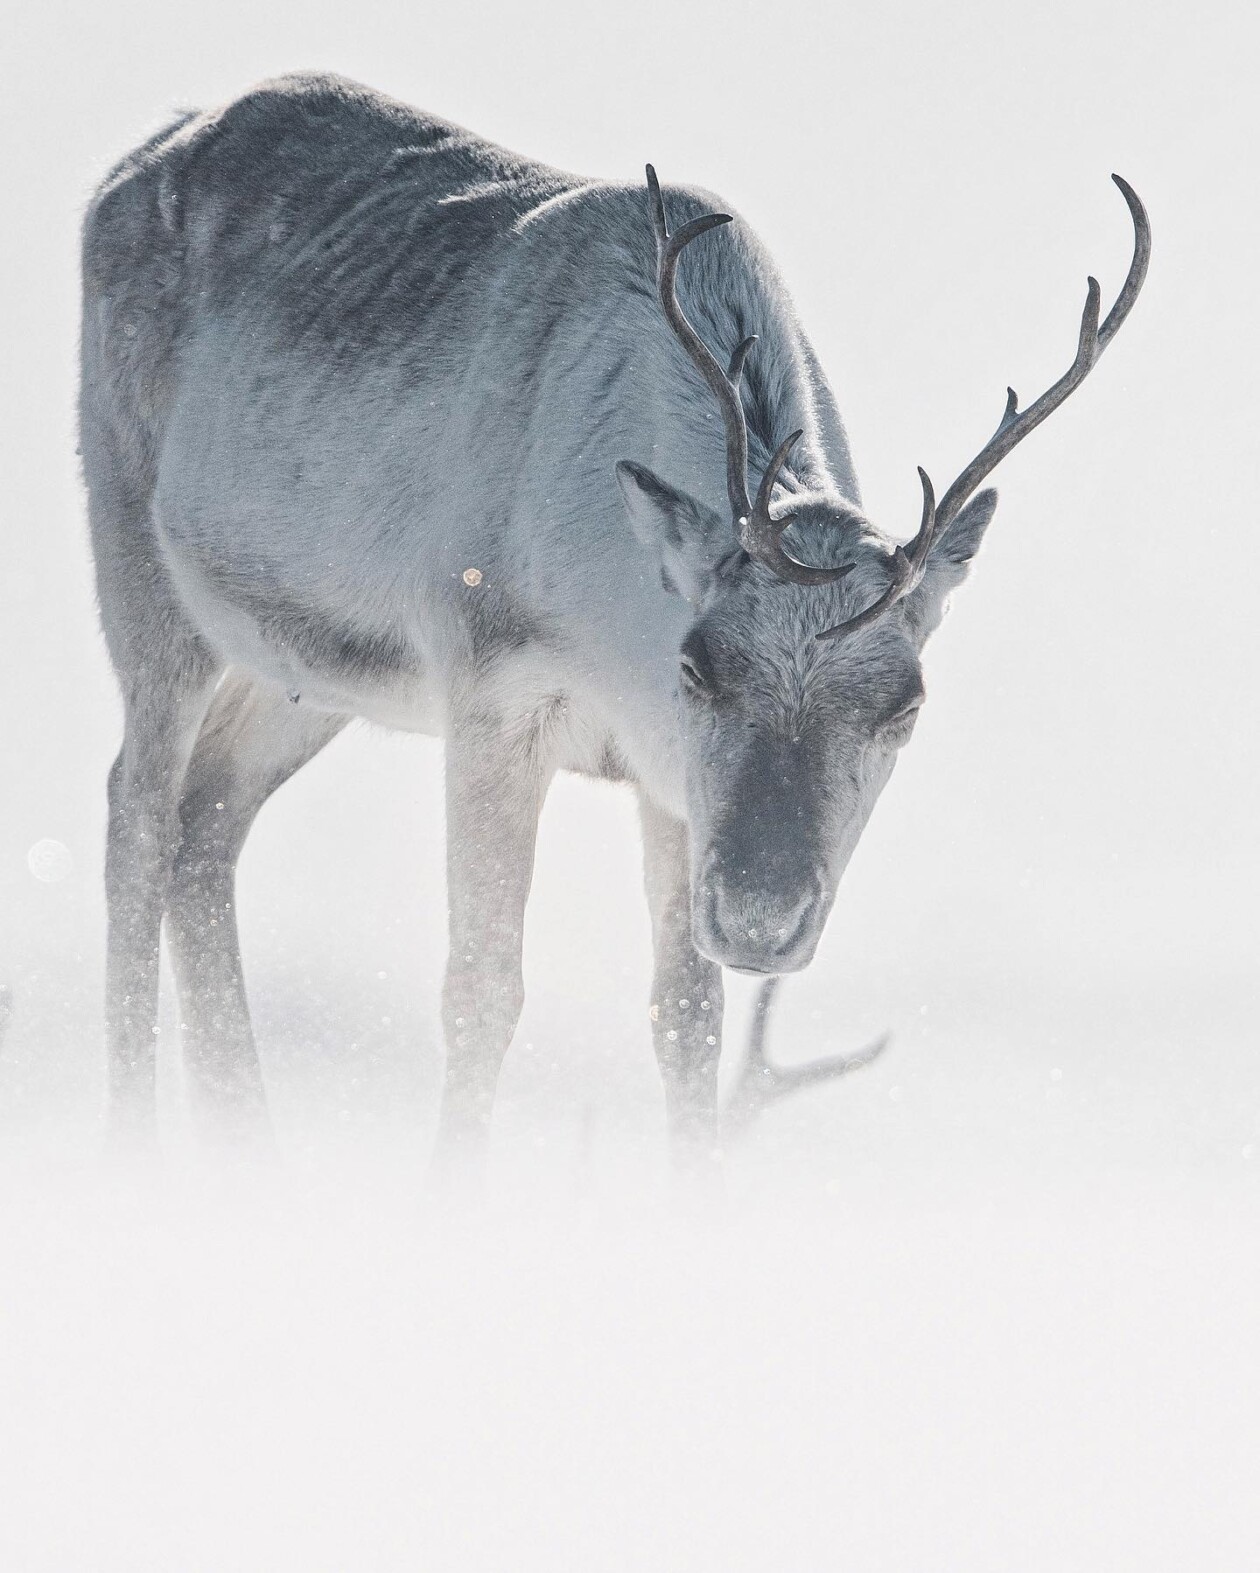 Captivating Pictures Of Arctic Animals By Konsta Punkka (5)